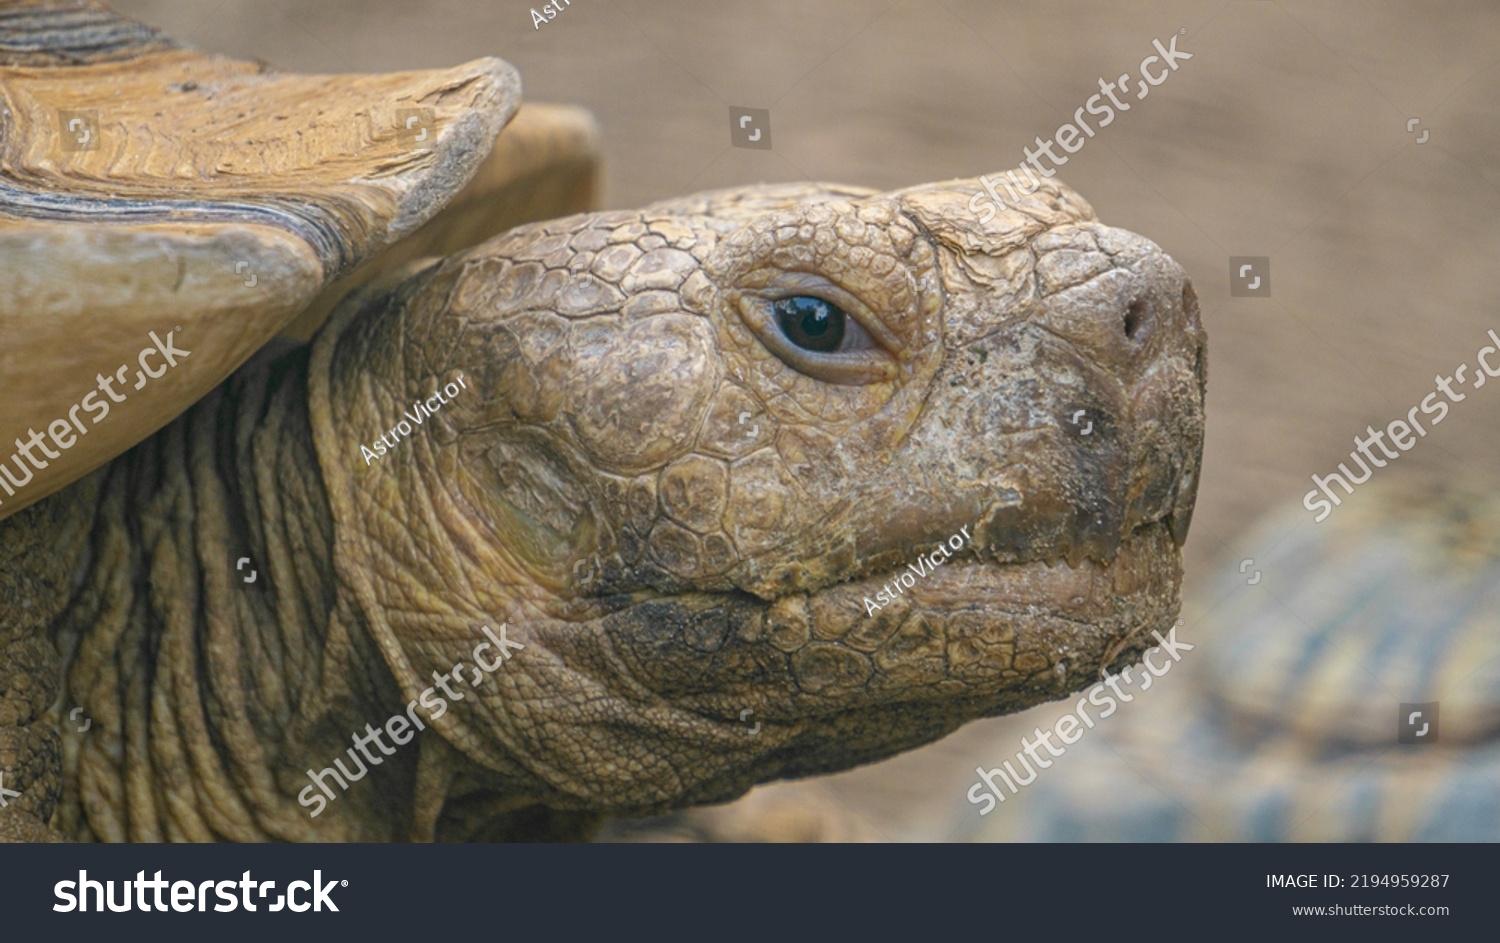 Close-up portrait of an African Spurred Tortoise (Centrochelys sulcata). Also called the Sulcata Tortoise, it lives in the Sahara desert in Africa and is the largest mainland species of tortoise. #2194959287